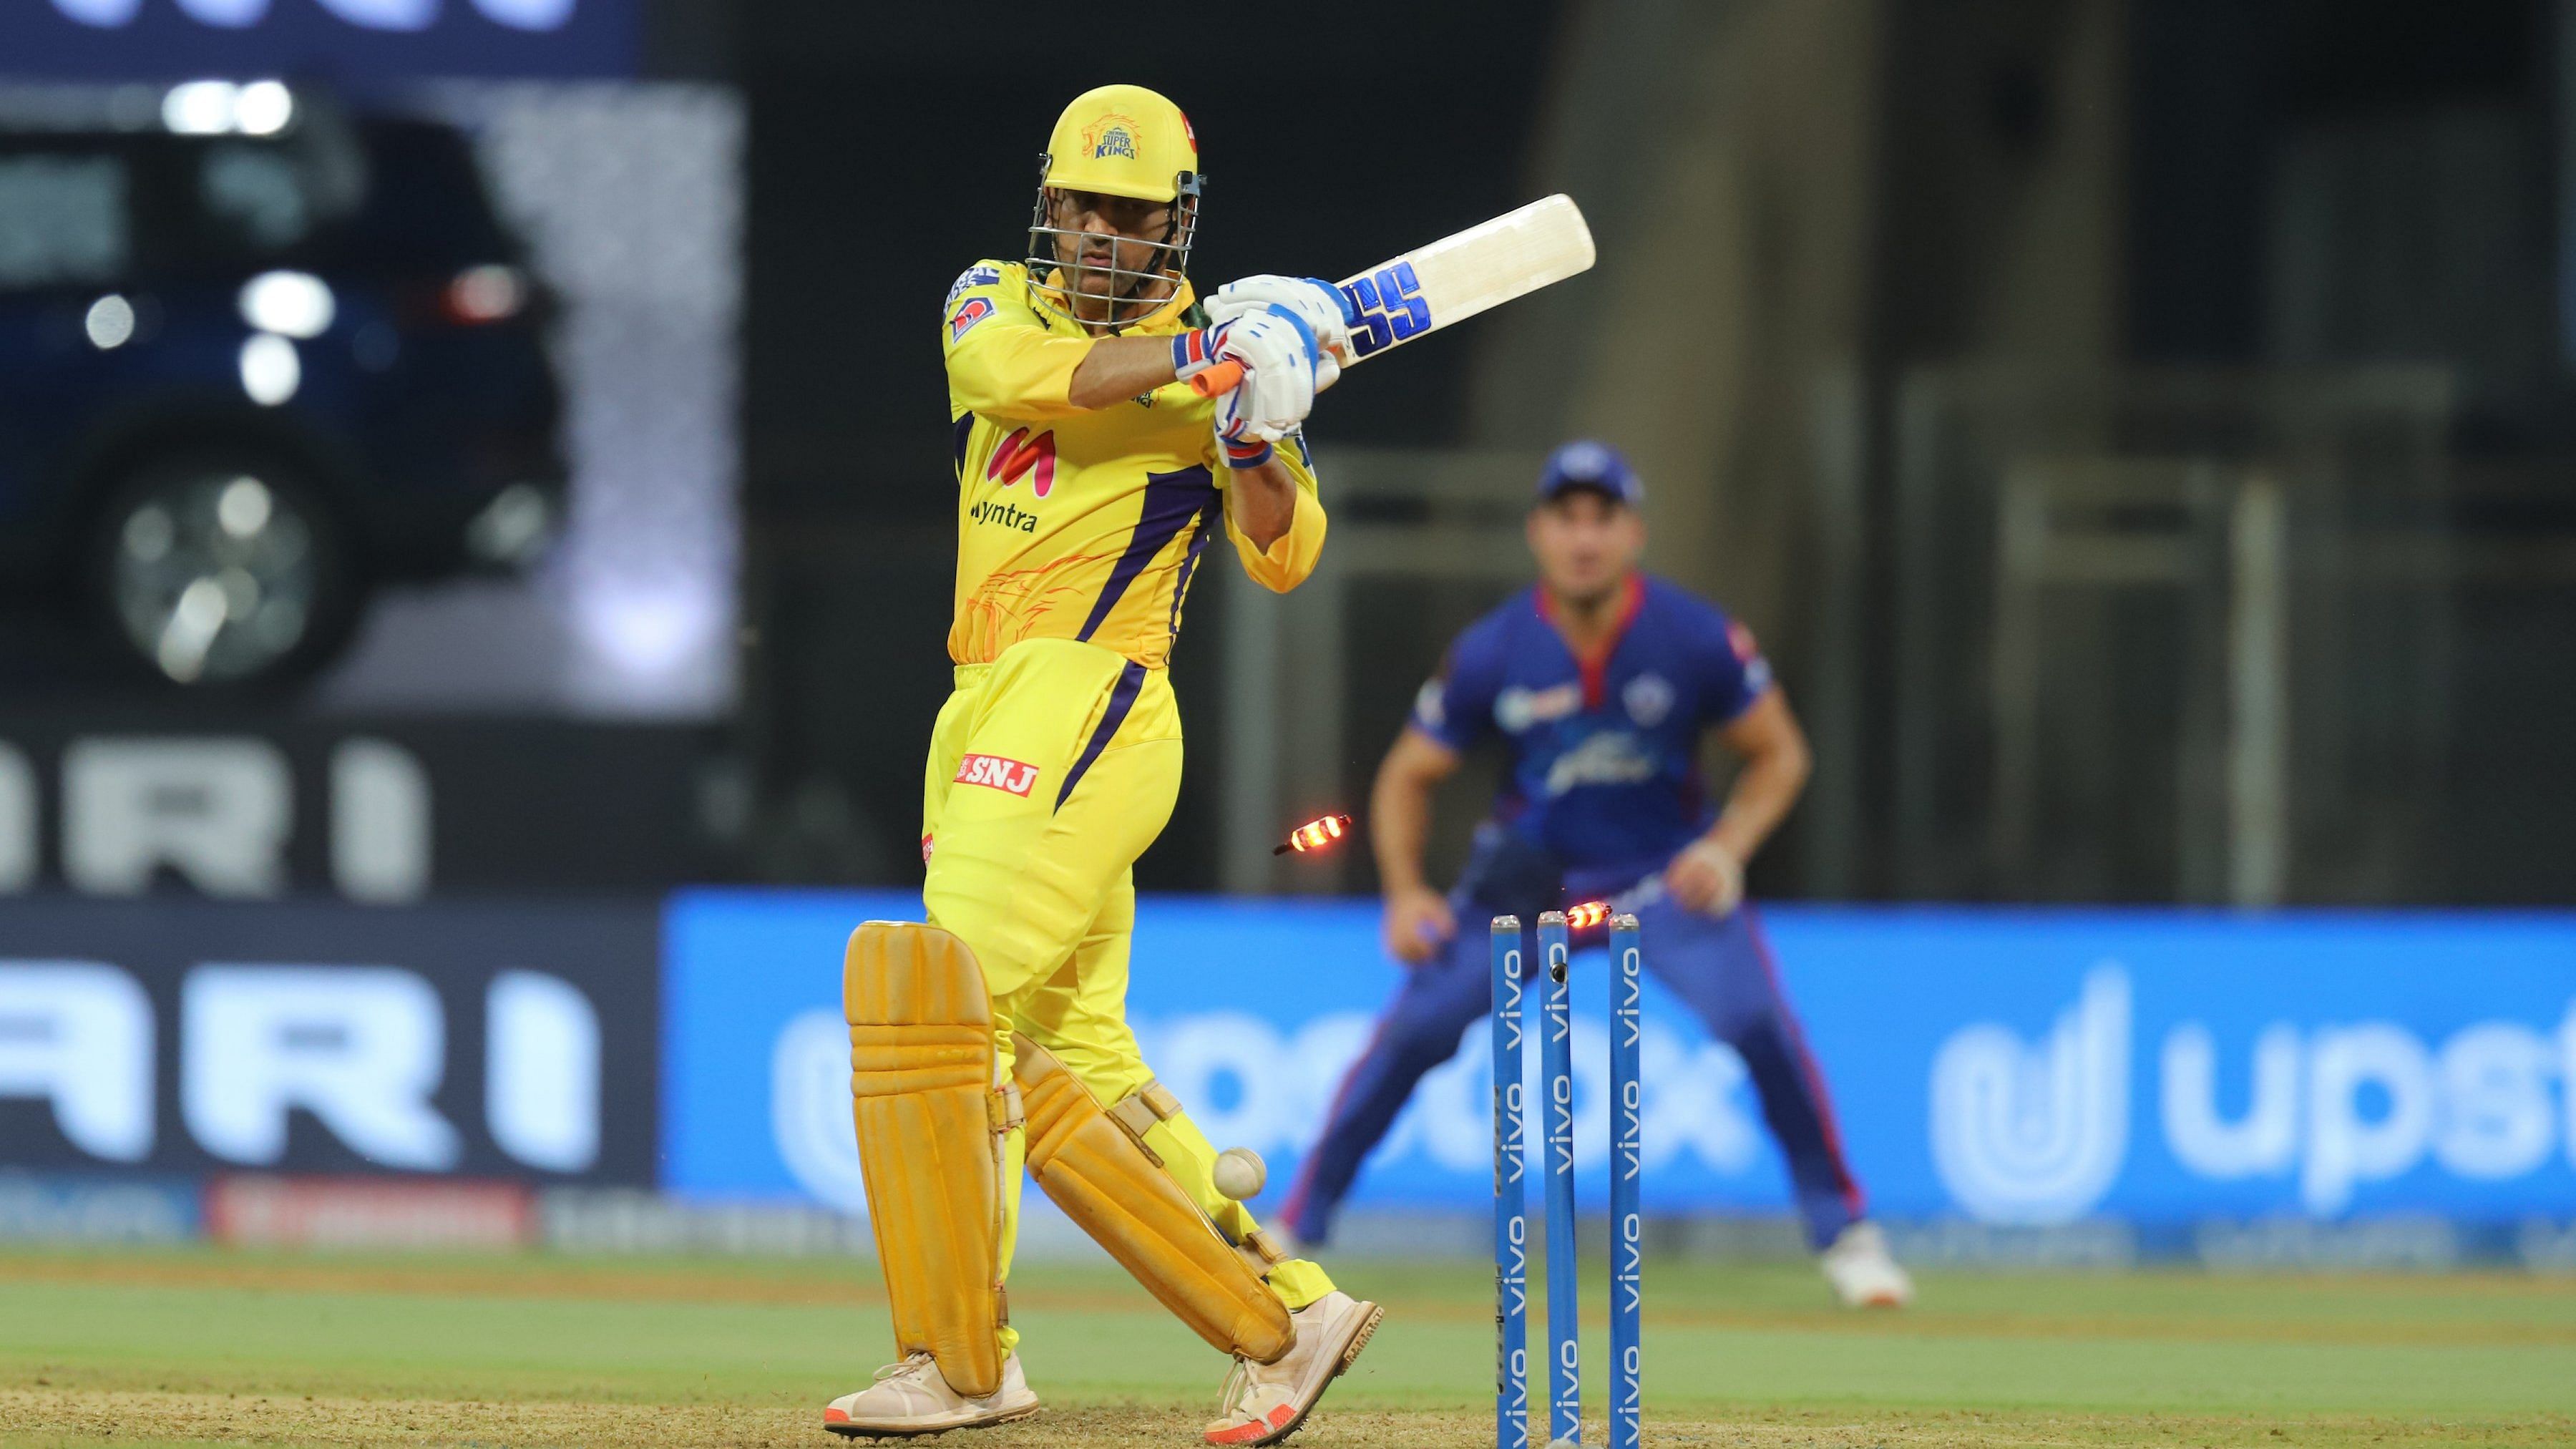 In this IPL season, Dhoni has scored a mere 18 runs from three innings so far. Credit: PTI